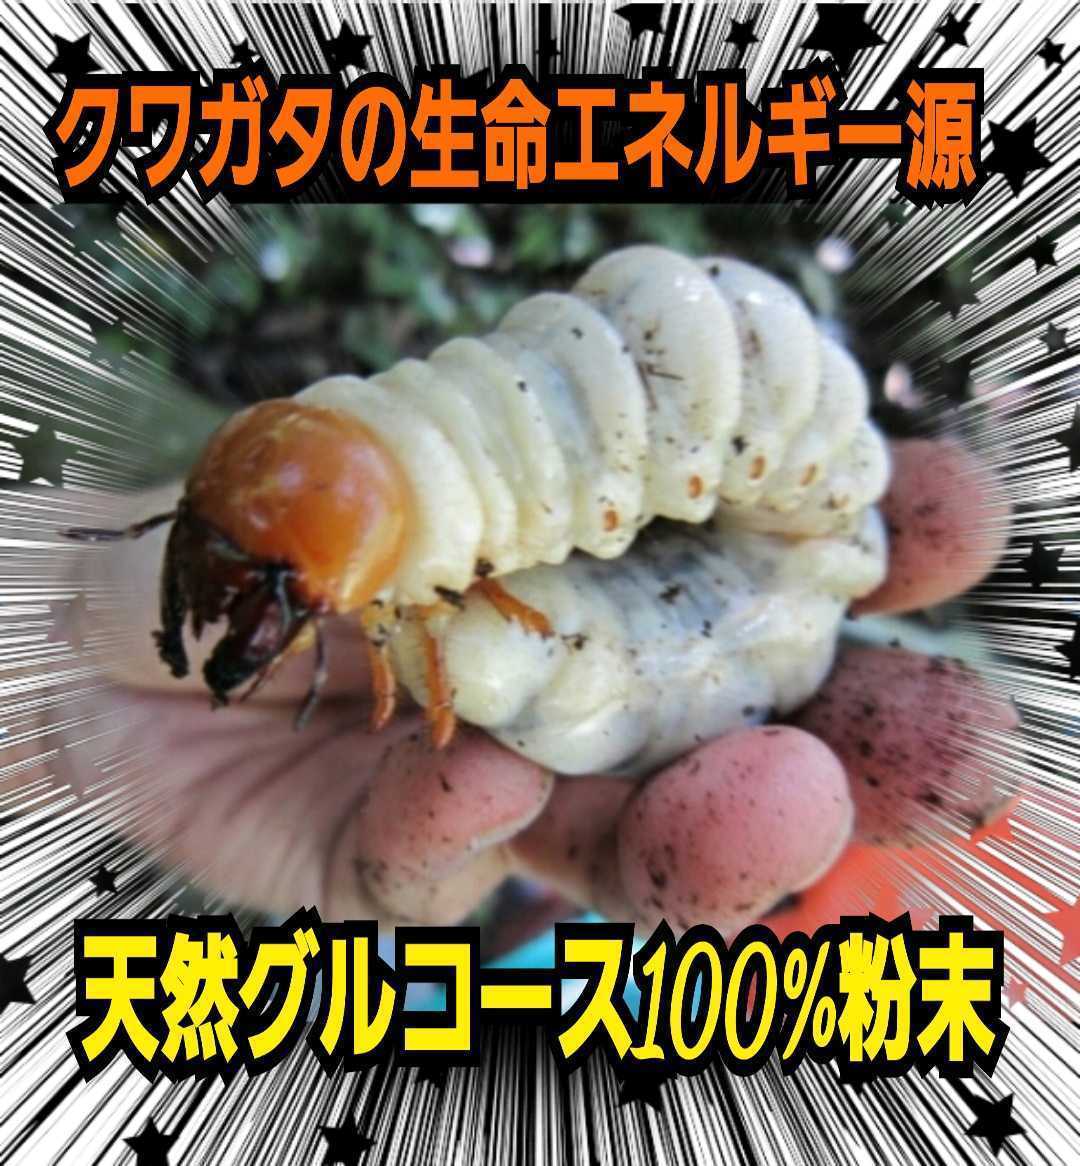  stag beetle * rhinoceros beetle exclusive use nutrition addition agent gru course * mat .. thread, jelly .... only . size up, production egg number up, length . exceptionally effective.!